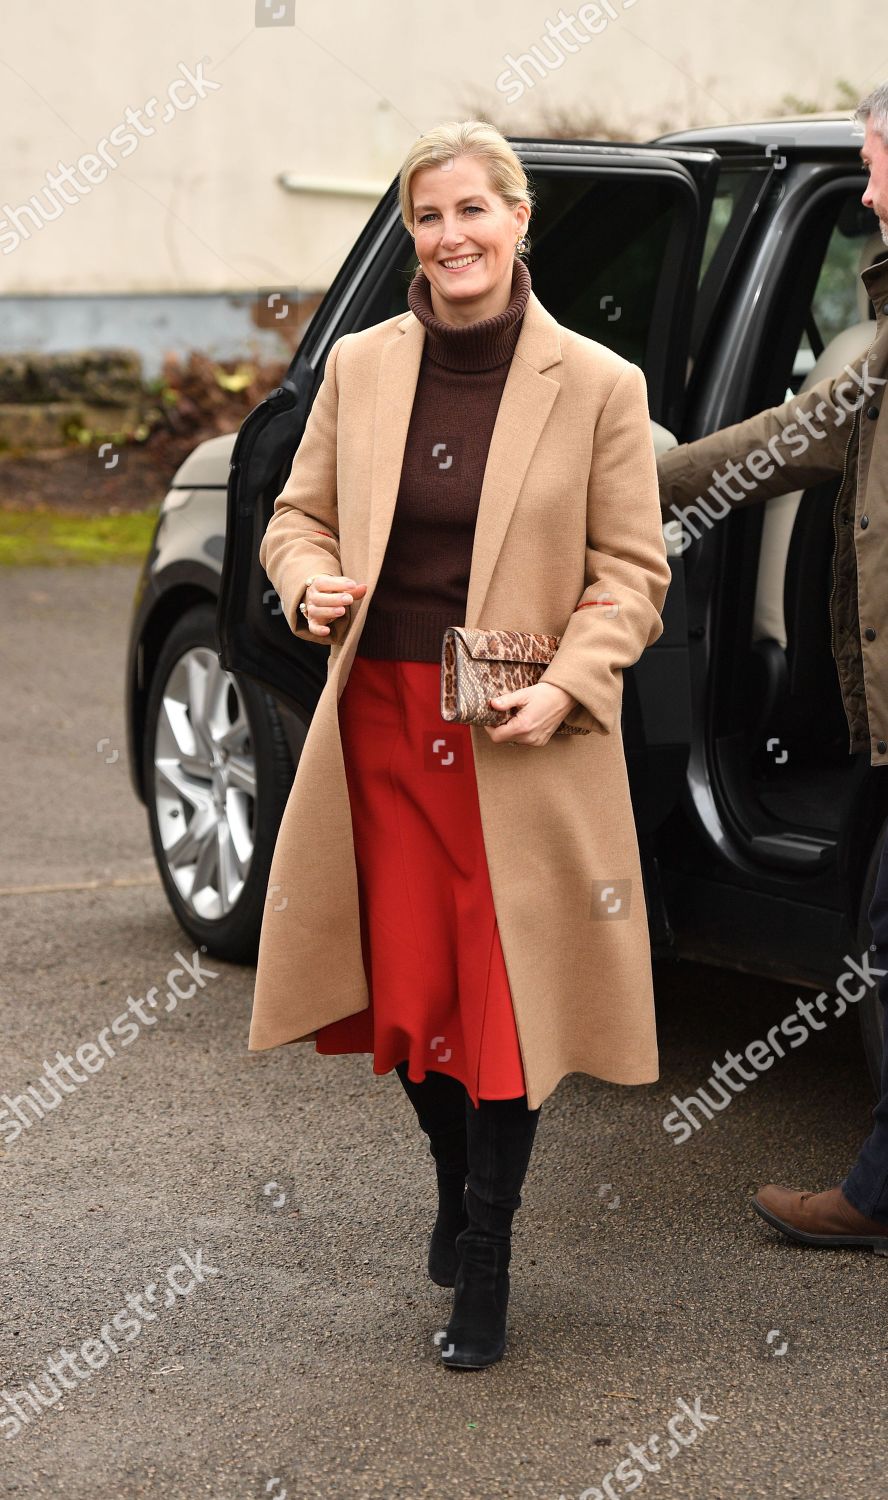 sophie-countess-of-wessex-visit-to-cumbria-shutterstock-editorial-10095439x.jpg